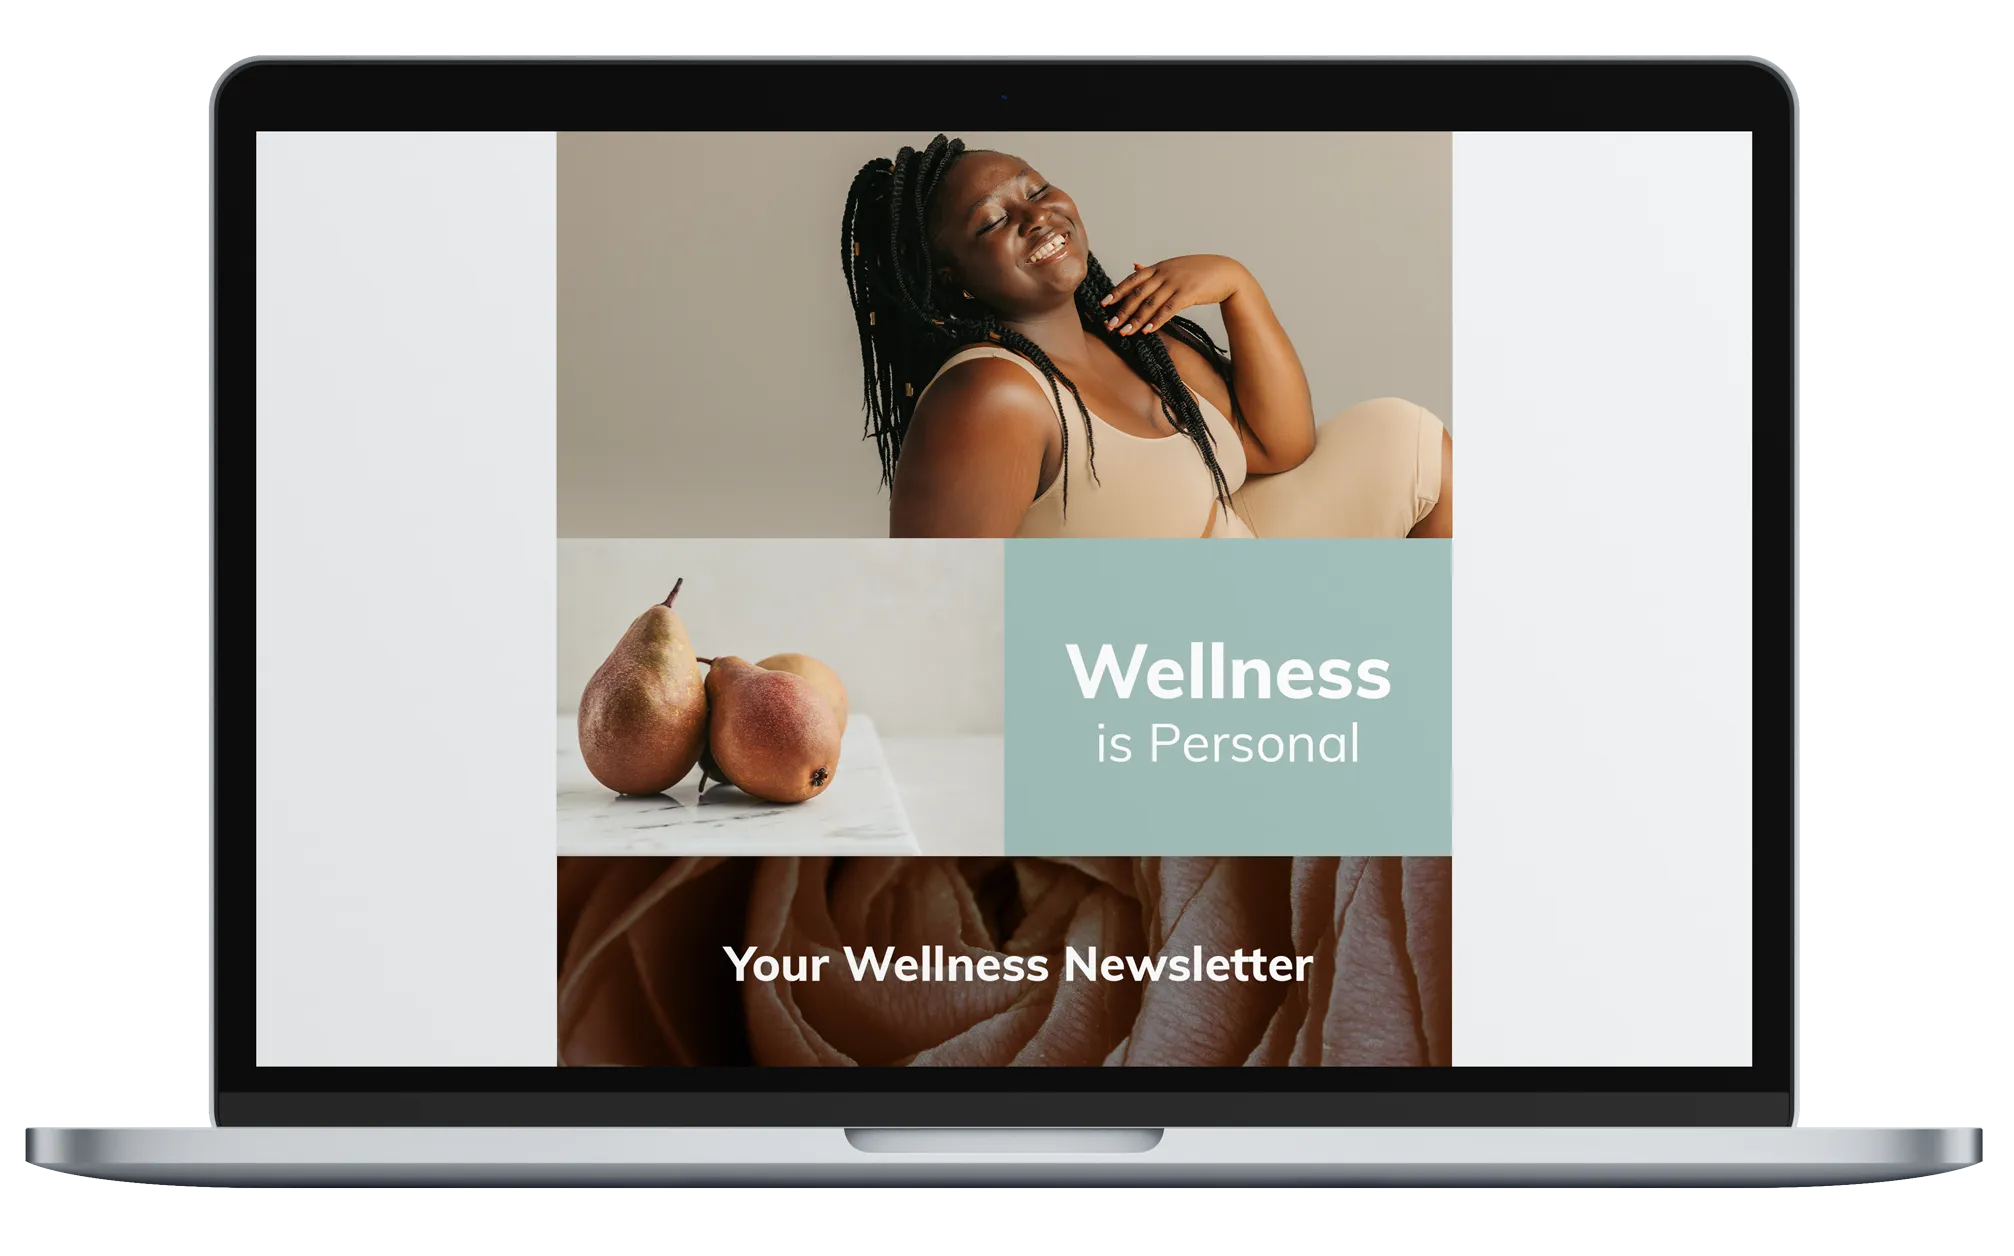 effortlessly create eye catching content | Everlytic | Campaign - Wellness Industry